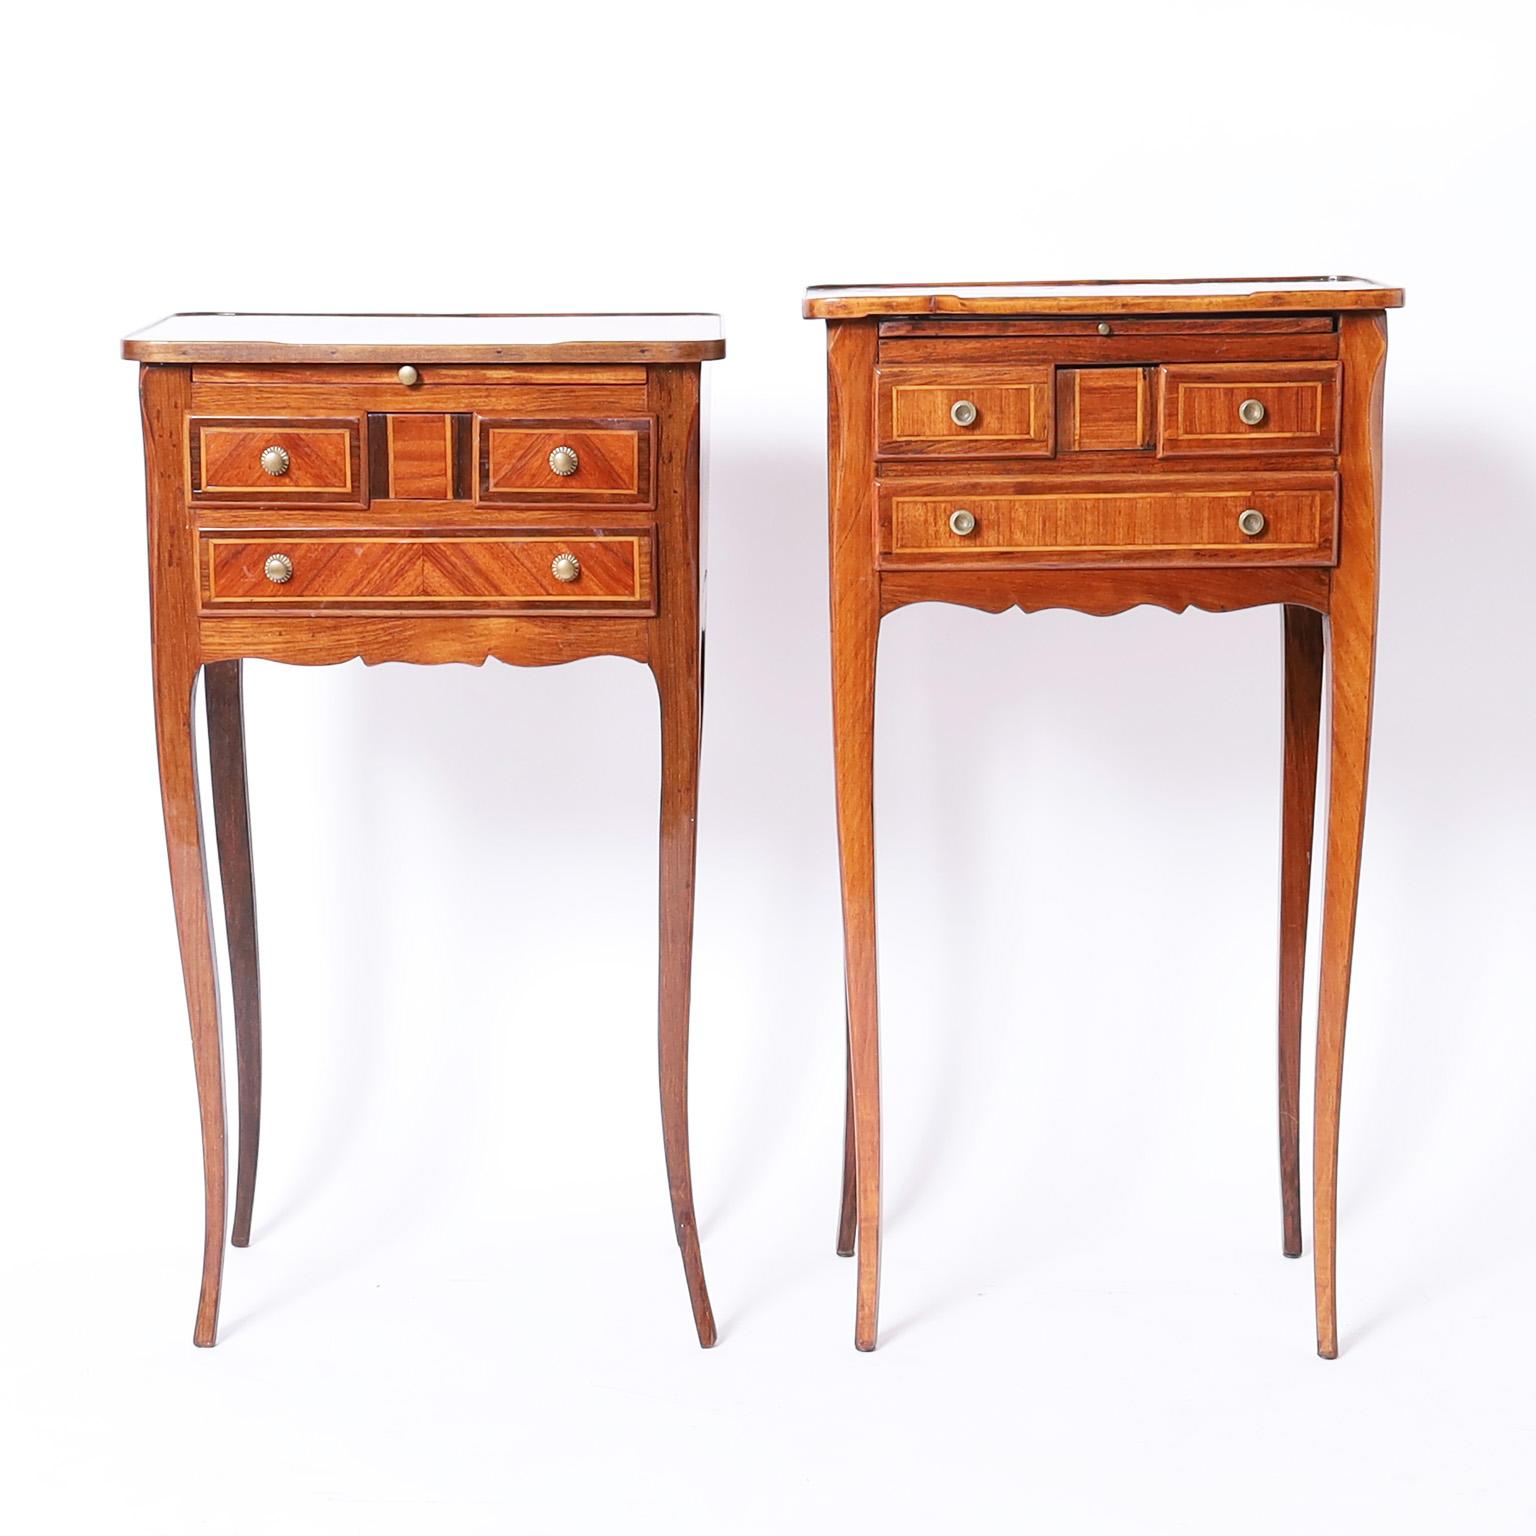 Tall elegant near pair of French stands or tables both crafted with walnut tops over three drawer cases in mahogany with cross banding and pull out trays on long graceful legs.

From left to right:

H: 29.5 W: 17 D: 12 
H: 31 W: 17 D: 12